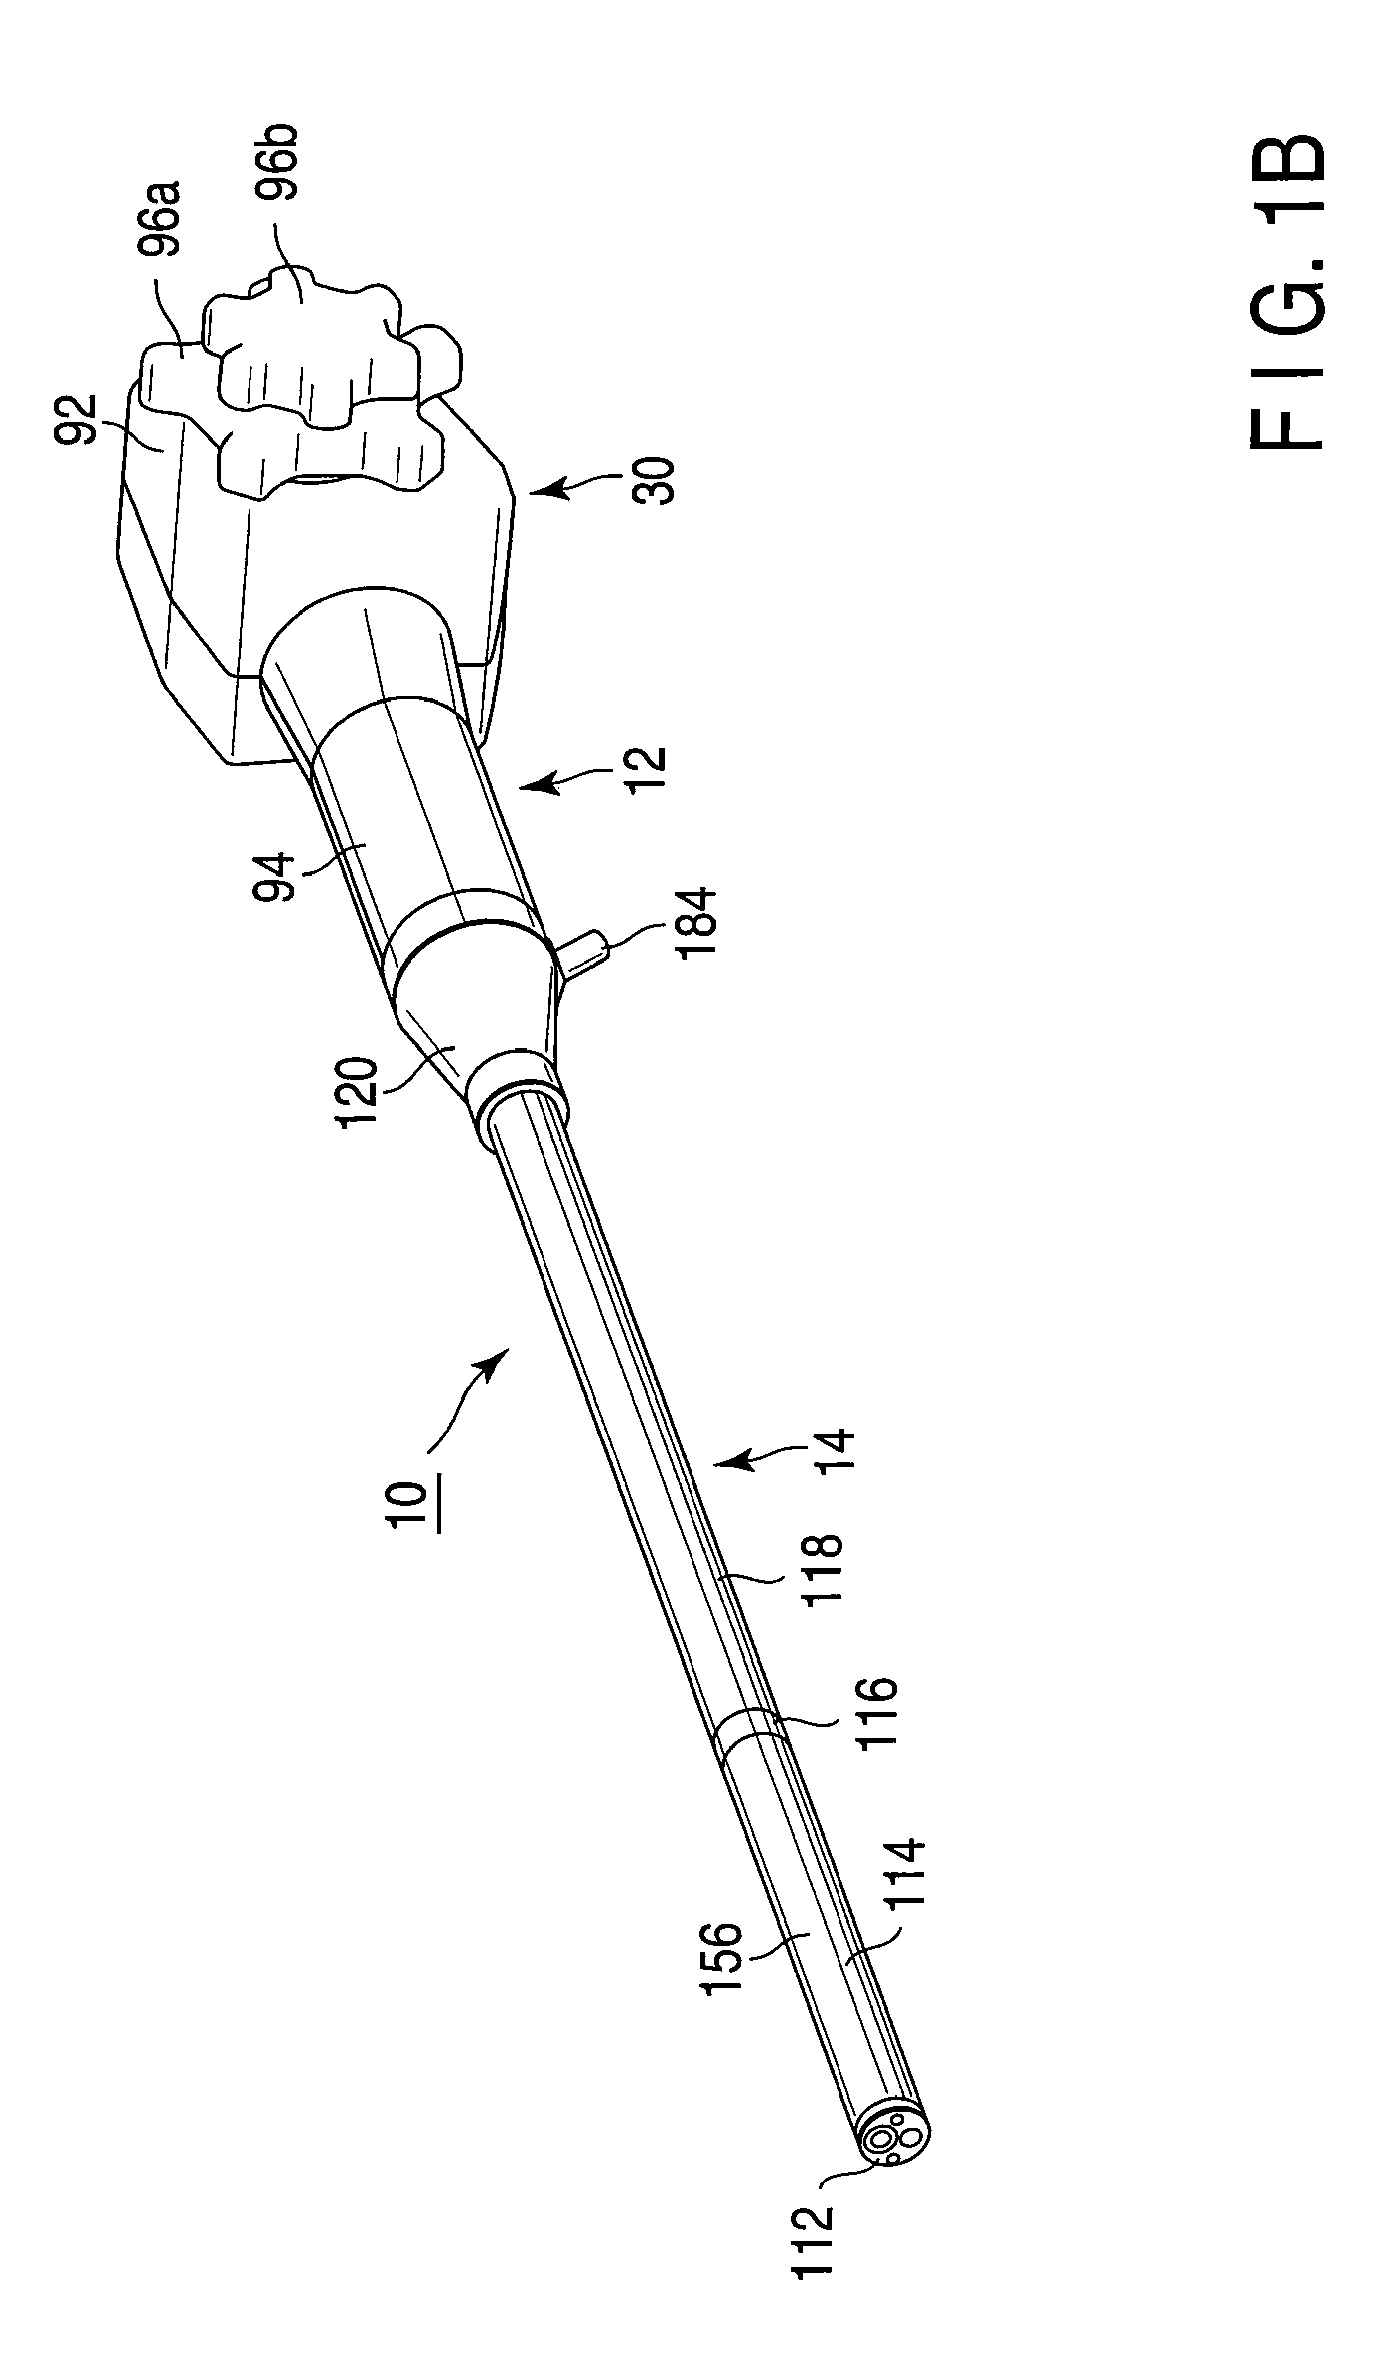 Covered-type endoscope, cover-adapted endoscope and endoscope-cover